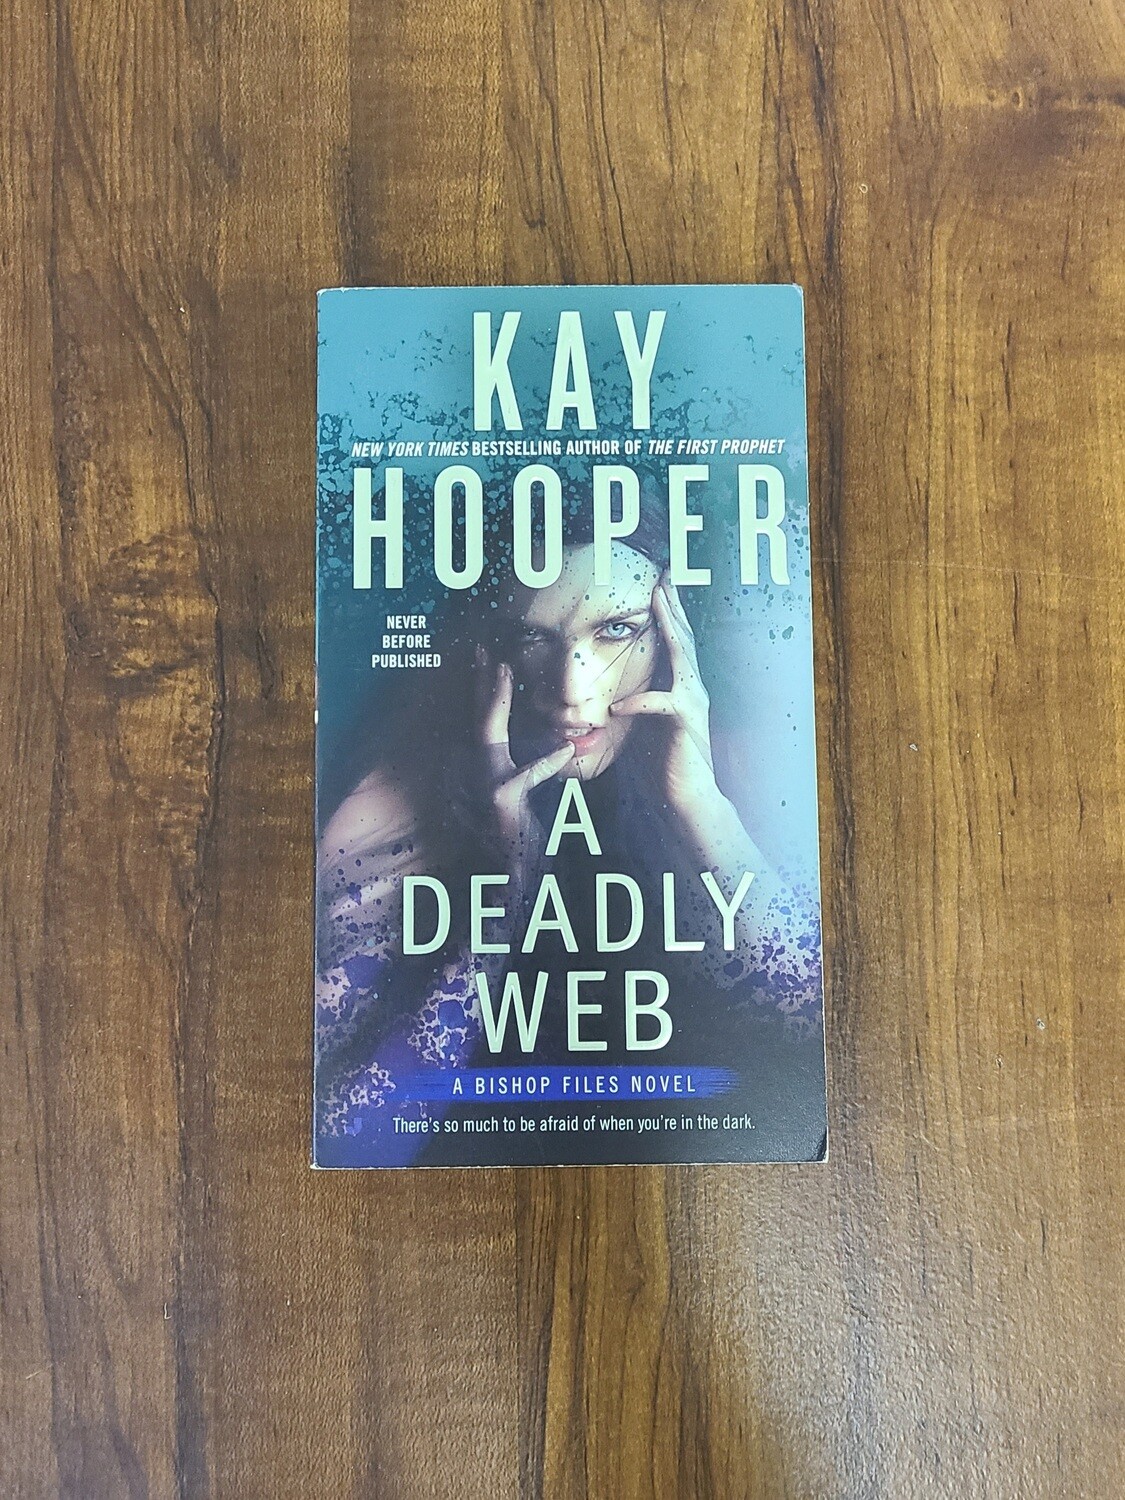 A Deadly Web by Kay Hooper